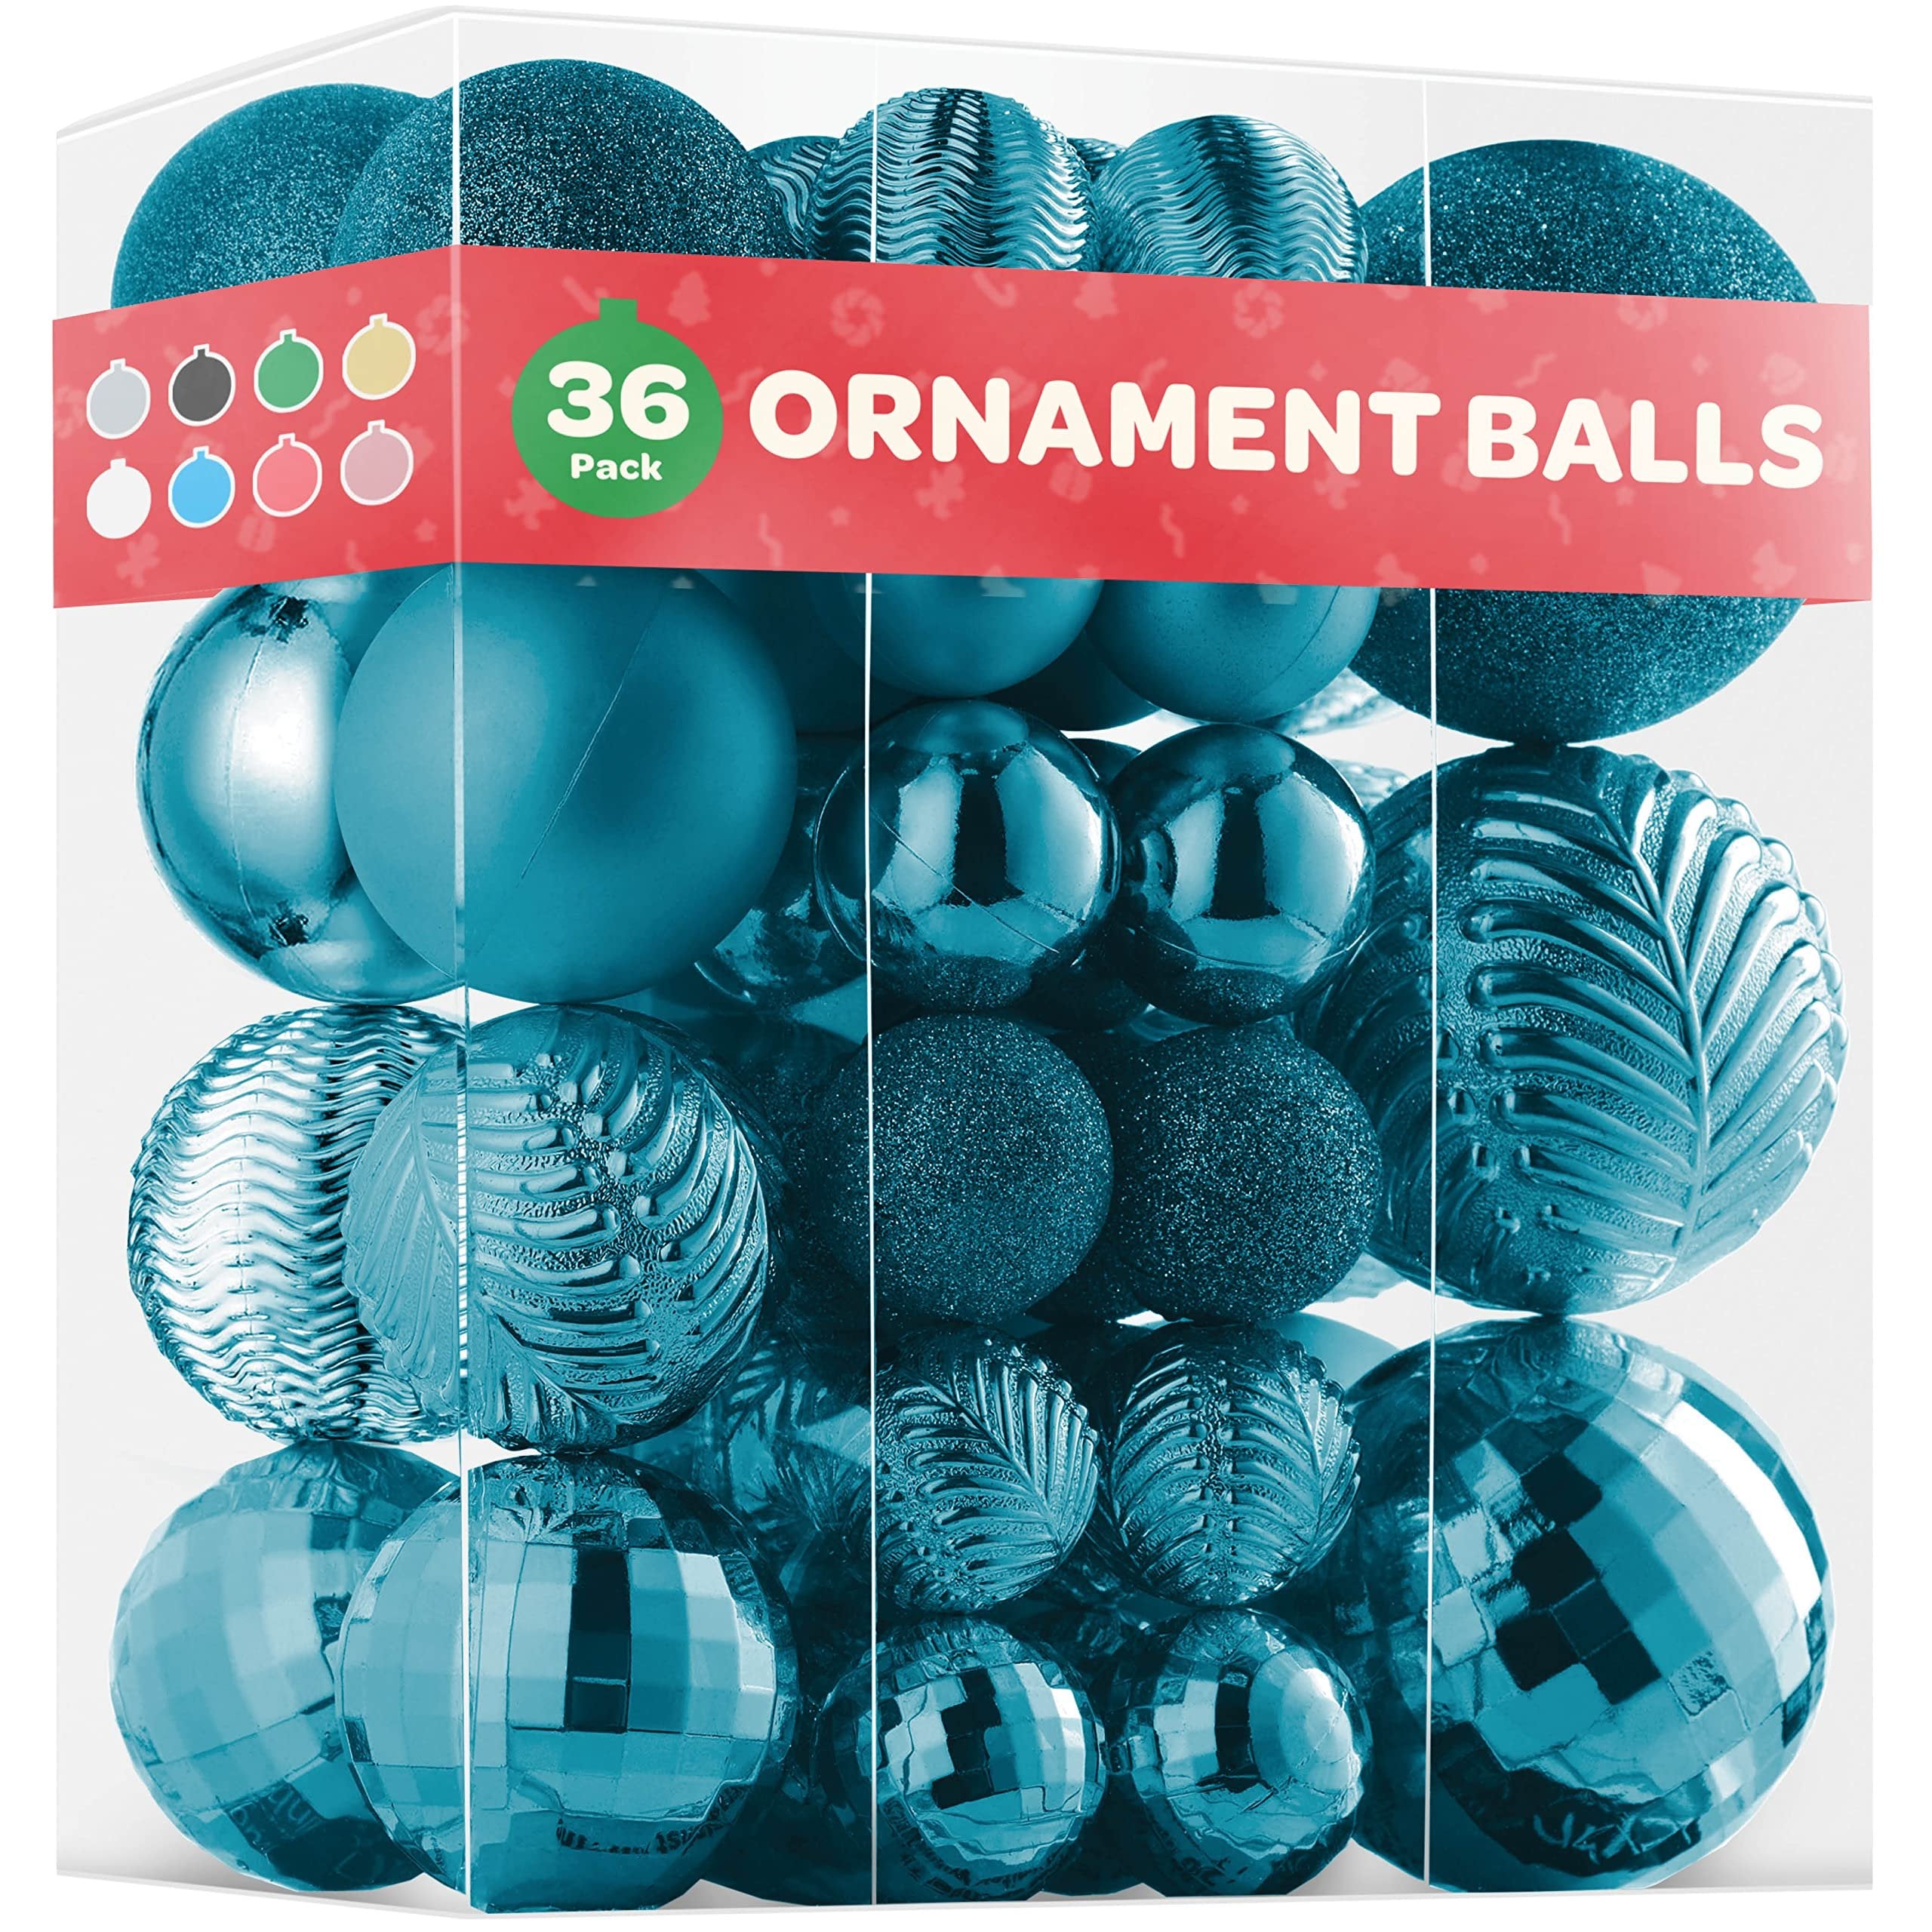 Christmas Ornaments Set of 36 - Beautiful [Teal] Christmas Tree Decorations Ornaments Set - 6 Style Christmas Ball Ornaments - Shatterproof/Pre-Strung - for Holiday/Party/Decorations/DIY